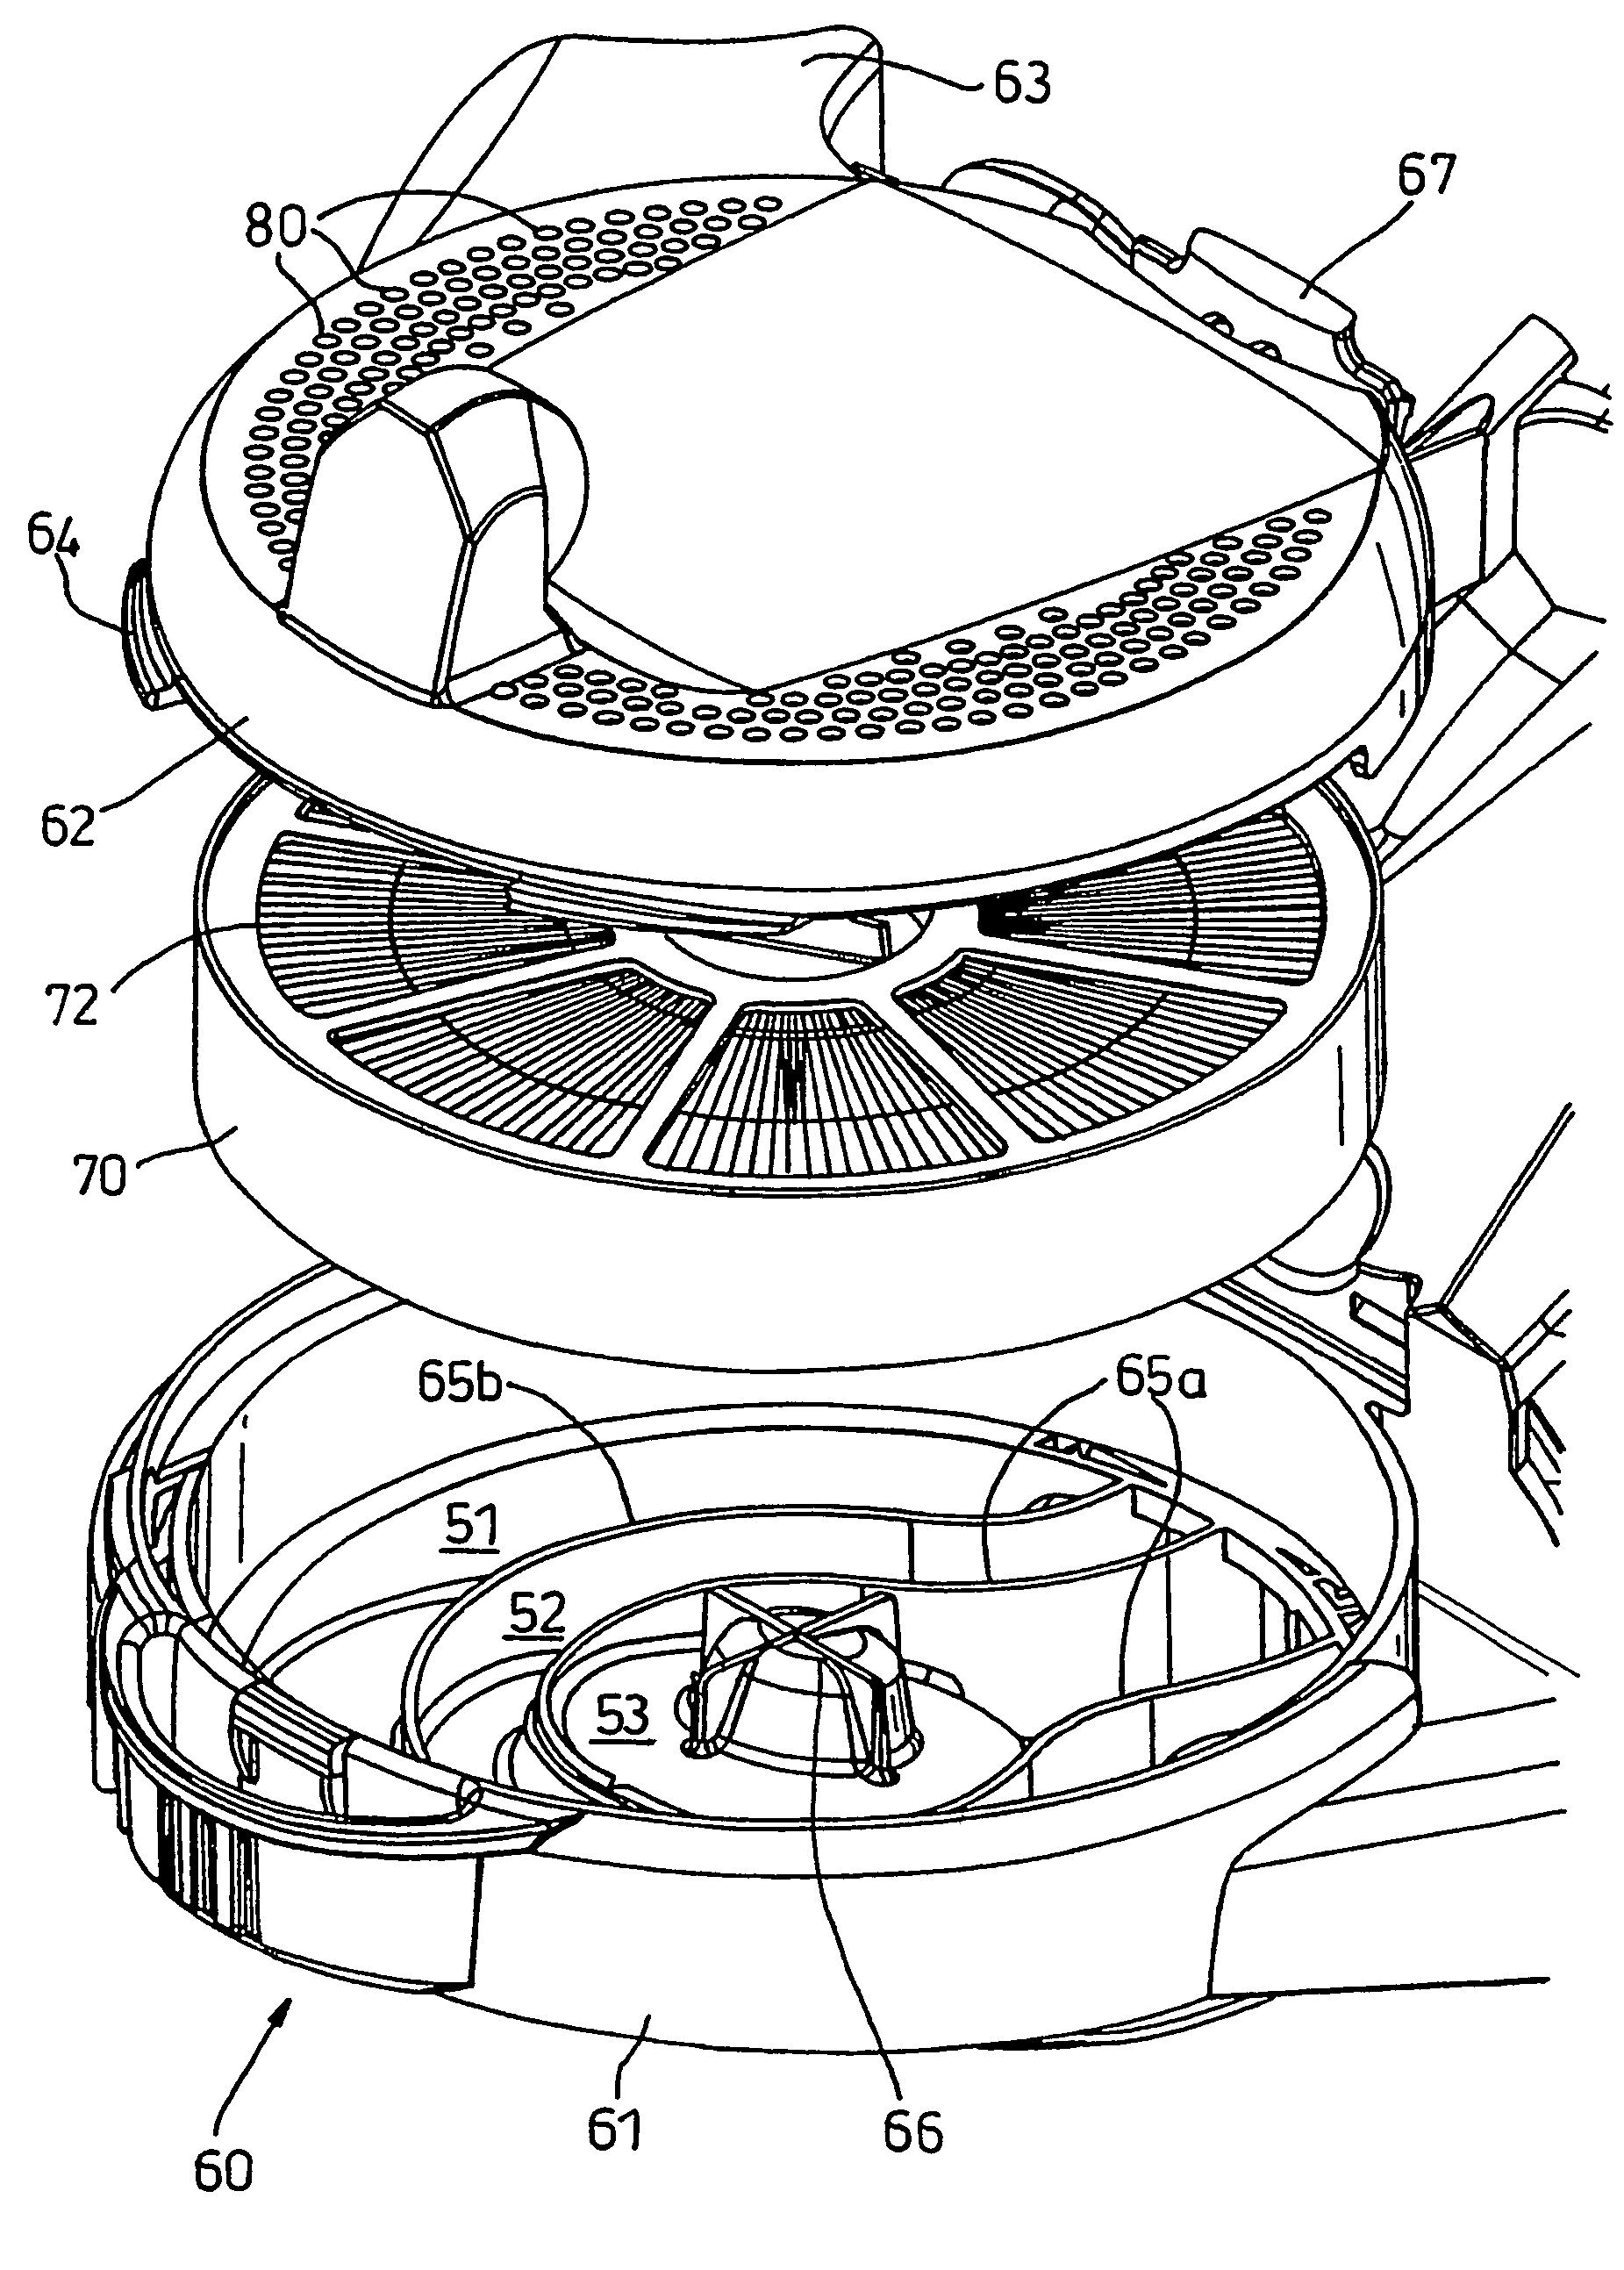 Filter housing for a domestic appliance